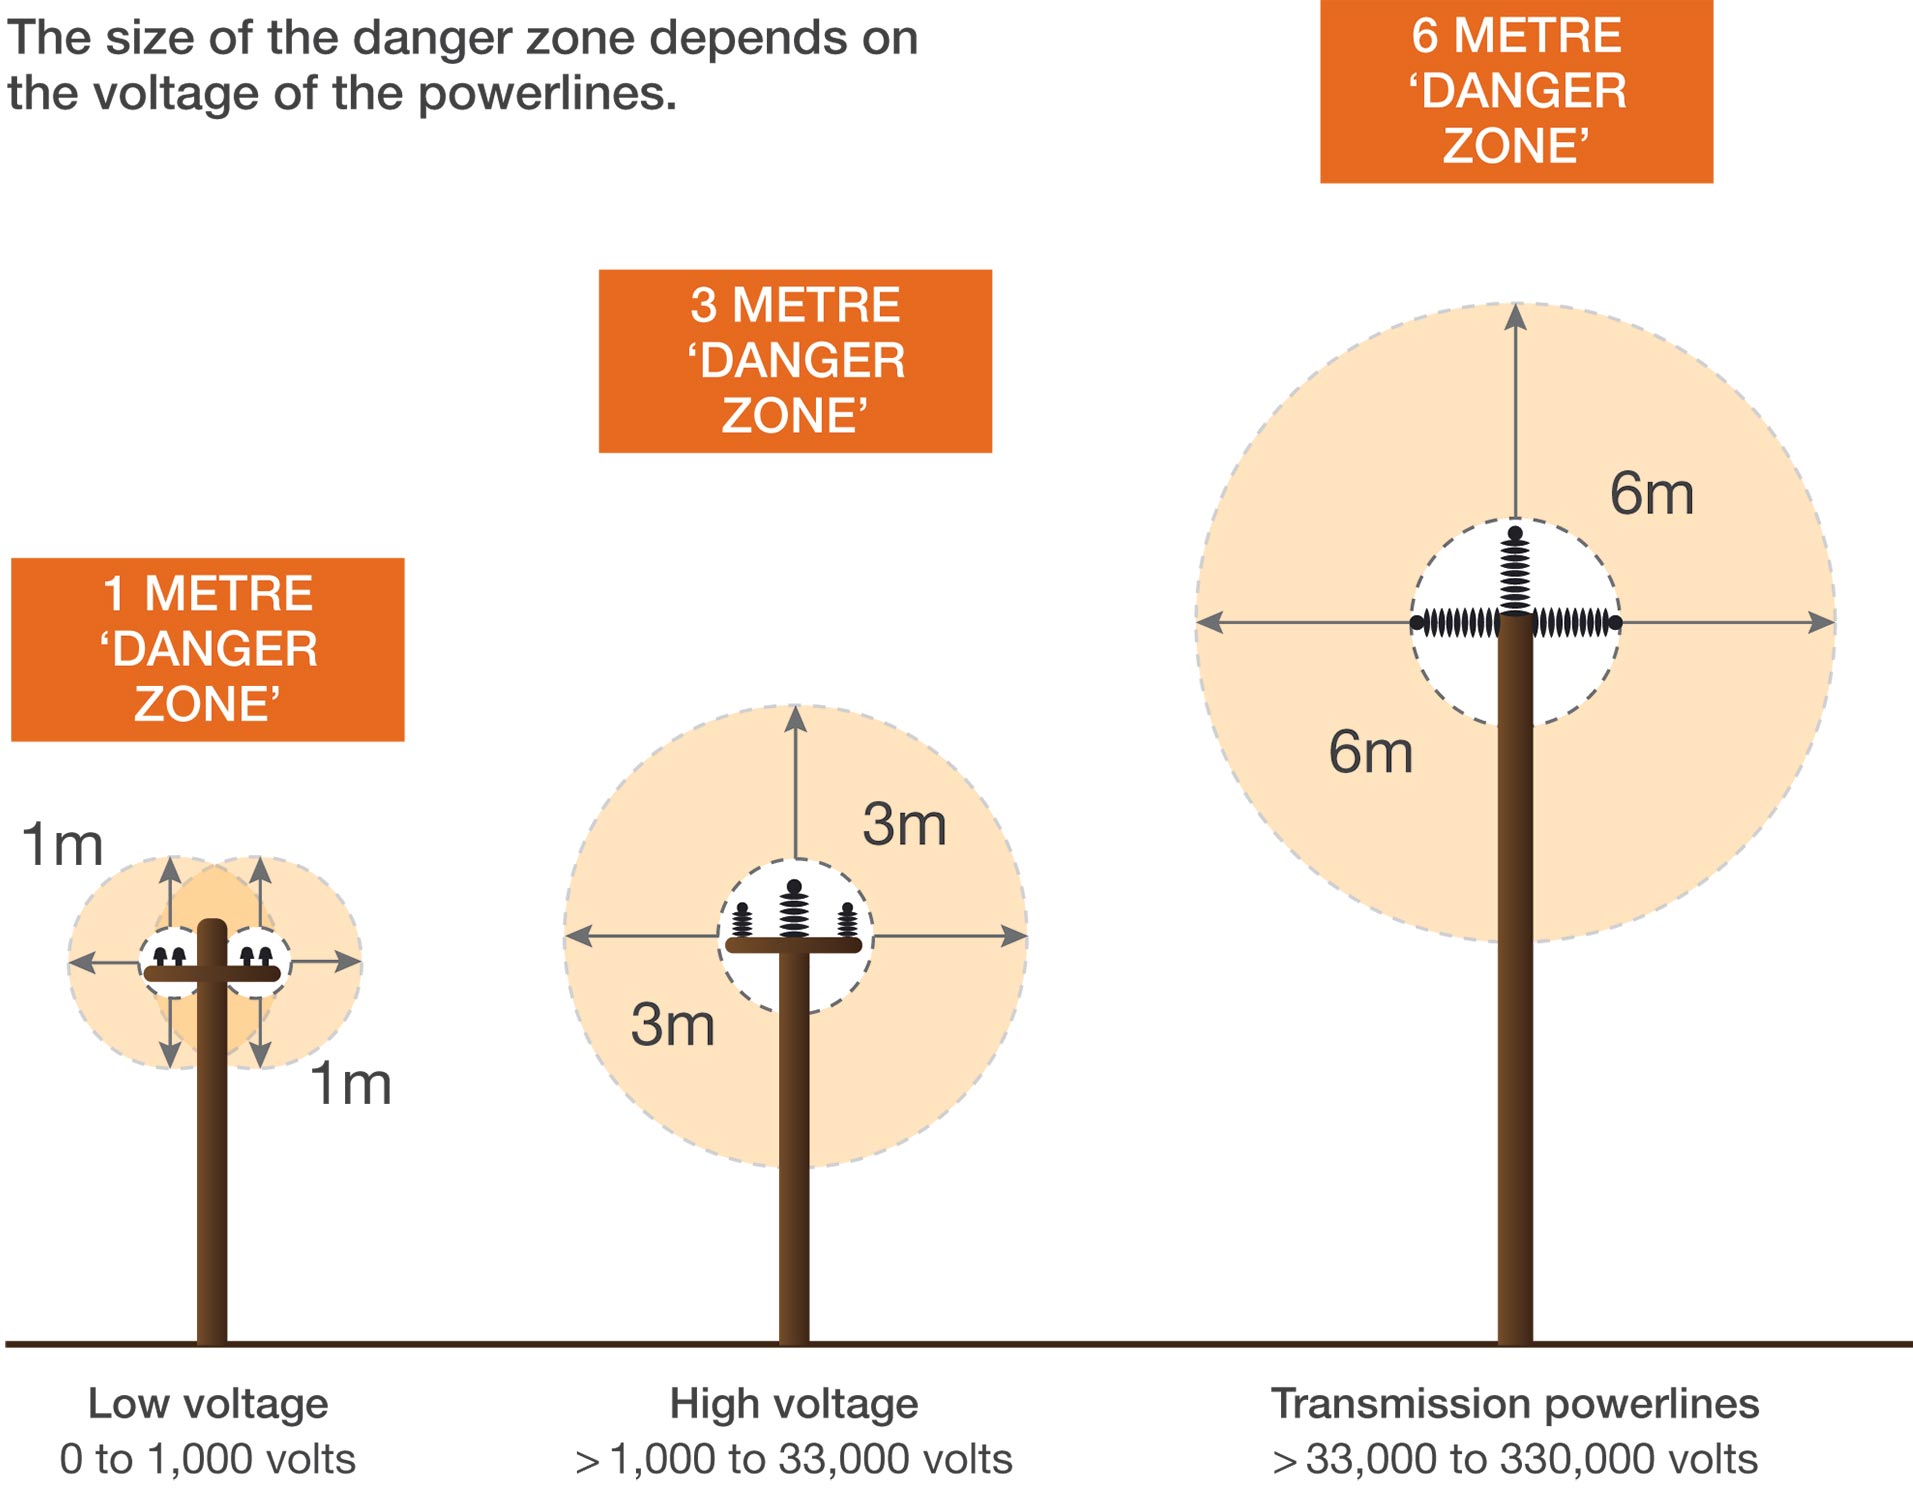 Illustration showing the different dangers zones depend on the voltage of the powerlines.